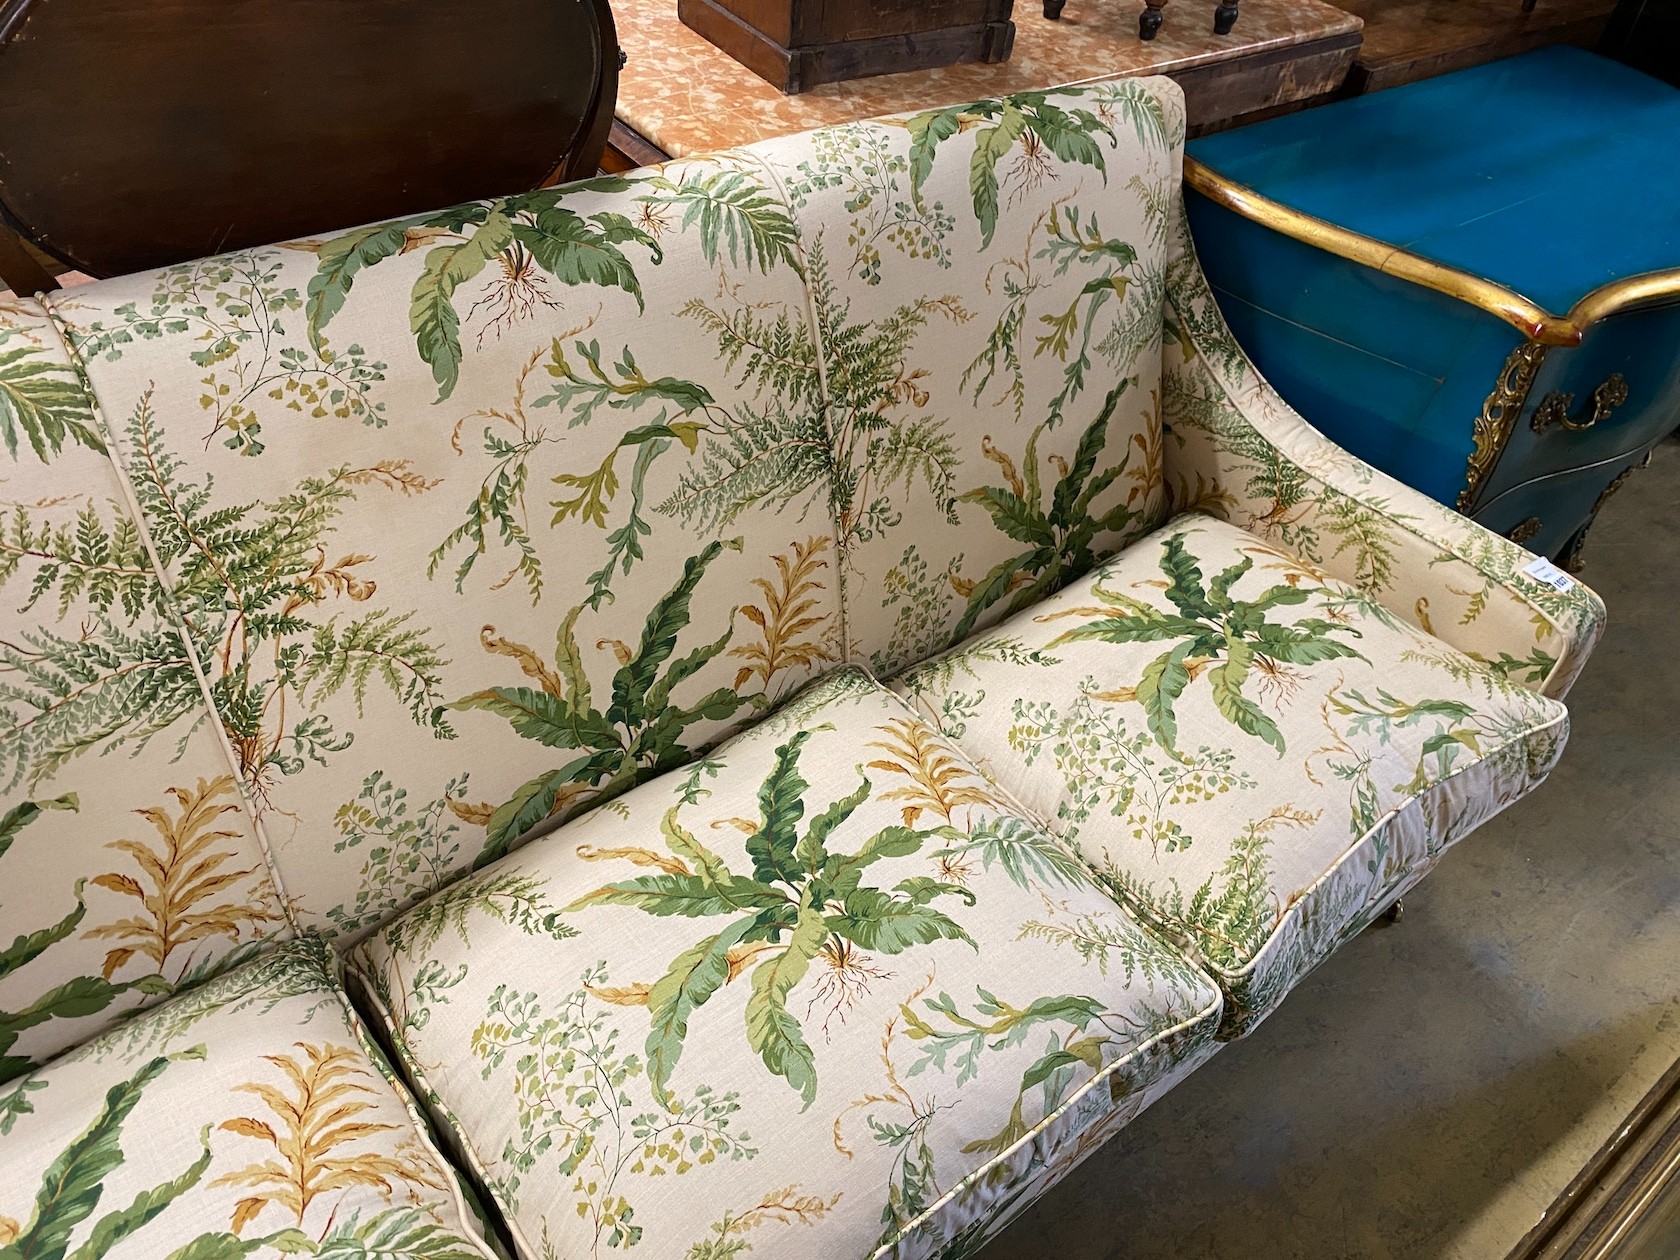 A “Highly Sprung Ltd” Colefax and Fowler fabric three seater sofa with feather cushion seats, width 210, depth 86cm, height 90cm.